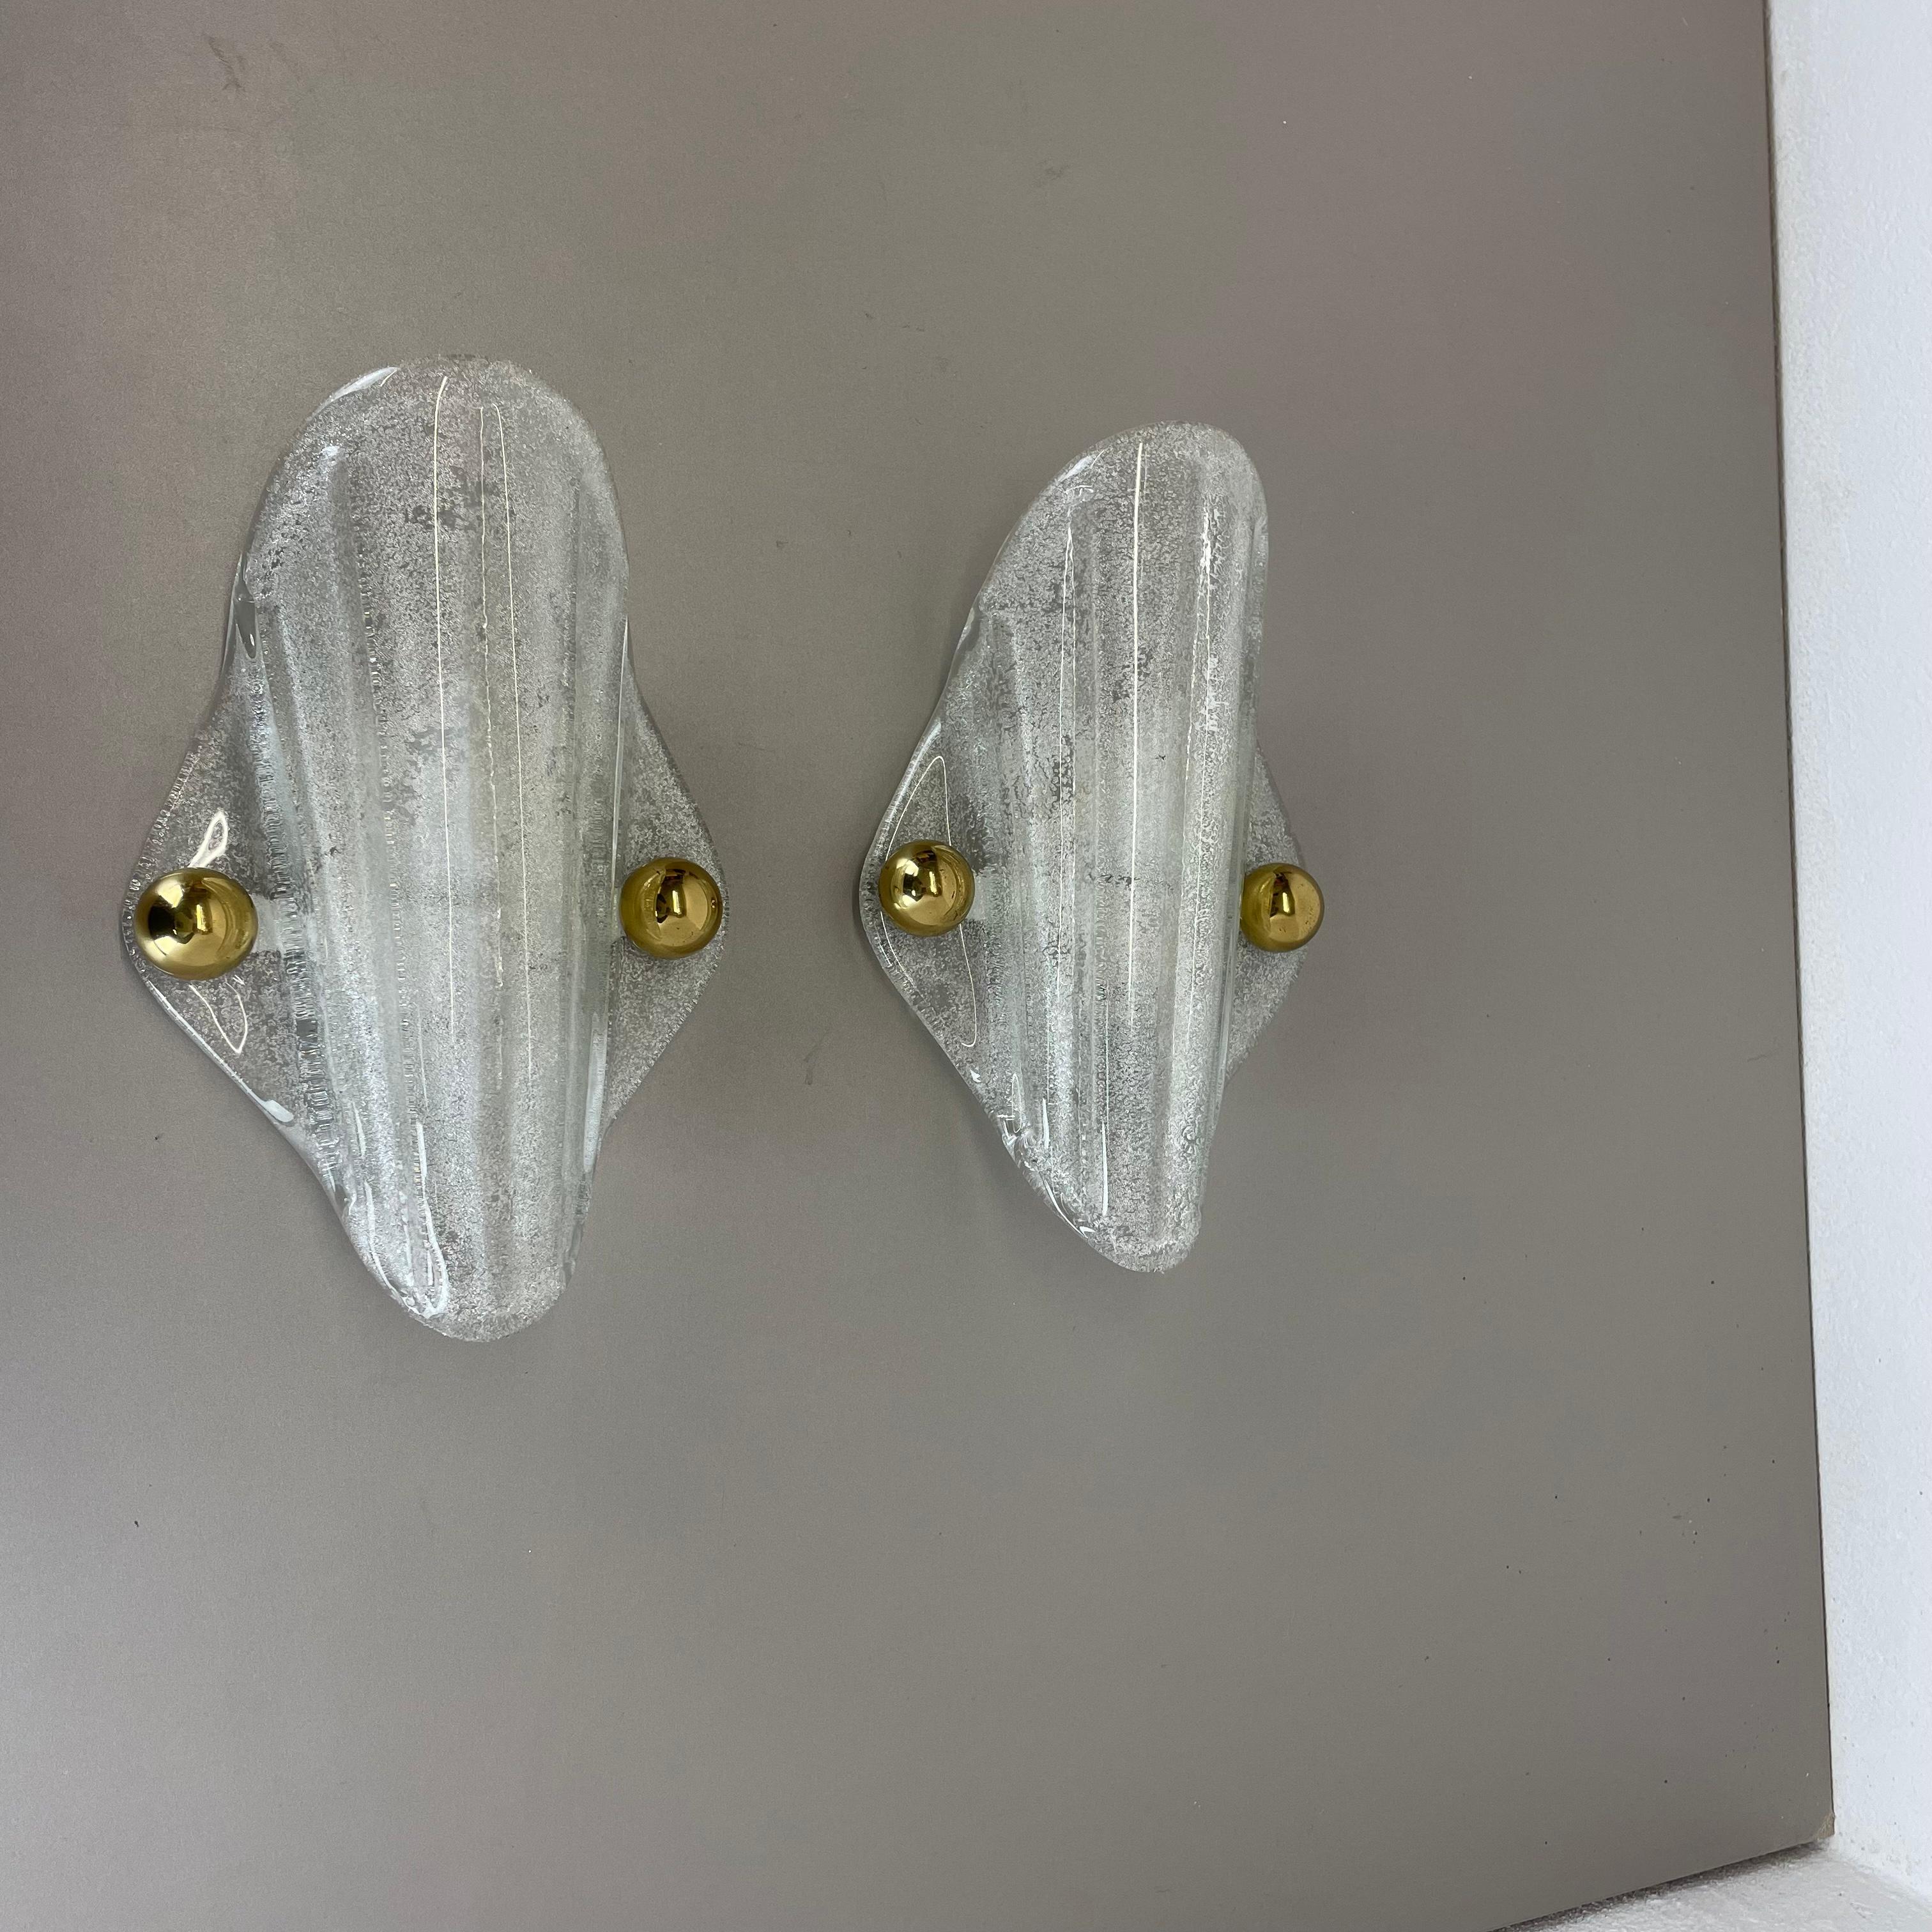 Article:

Set of two

Wall light sconces


Origin:

Germany


Producer:

Hillebrand Leuchten, Germany



Age:

1970s



This set of two modernist lights was produced in Germany in the 1970s. It is made from heavy italian